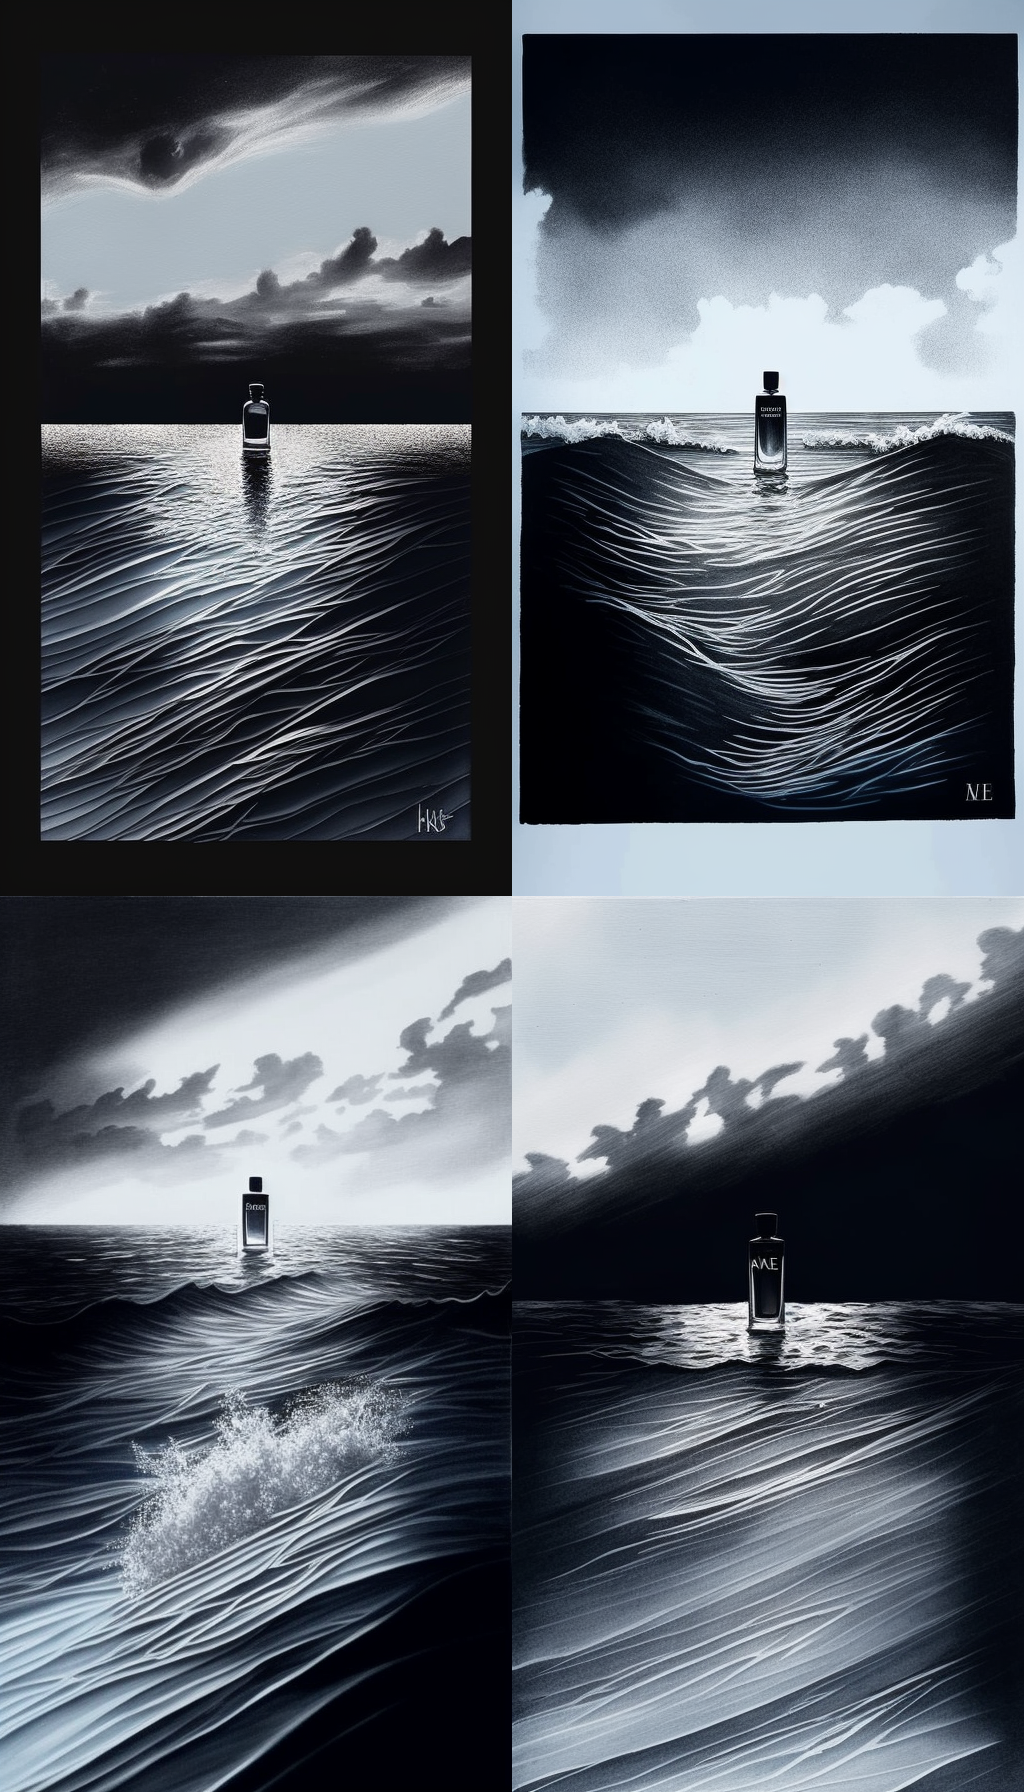 Gregory_Guerra_Wojnar_calm_ocean_water_black_and_white_sketch_p_a61413a6-4458-4930-8b72-c67cb4bf4648.png